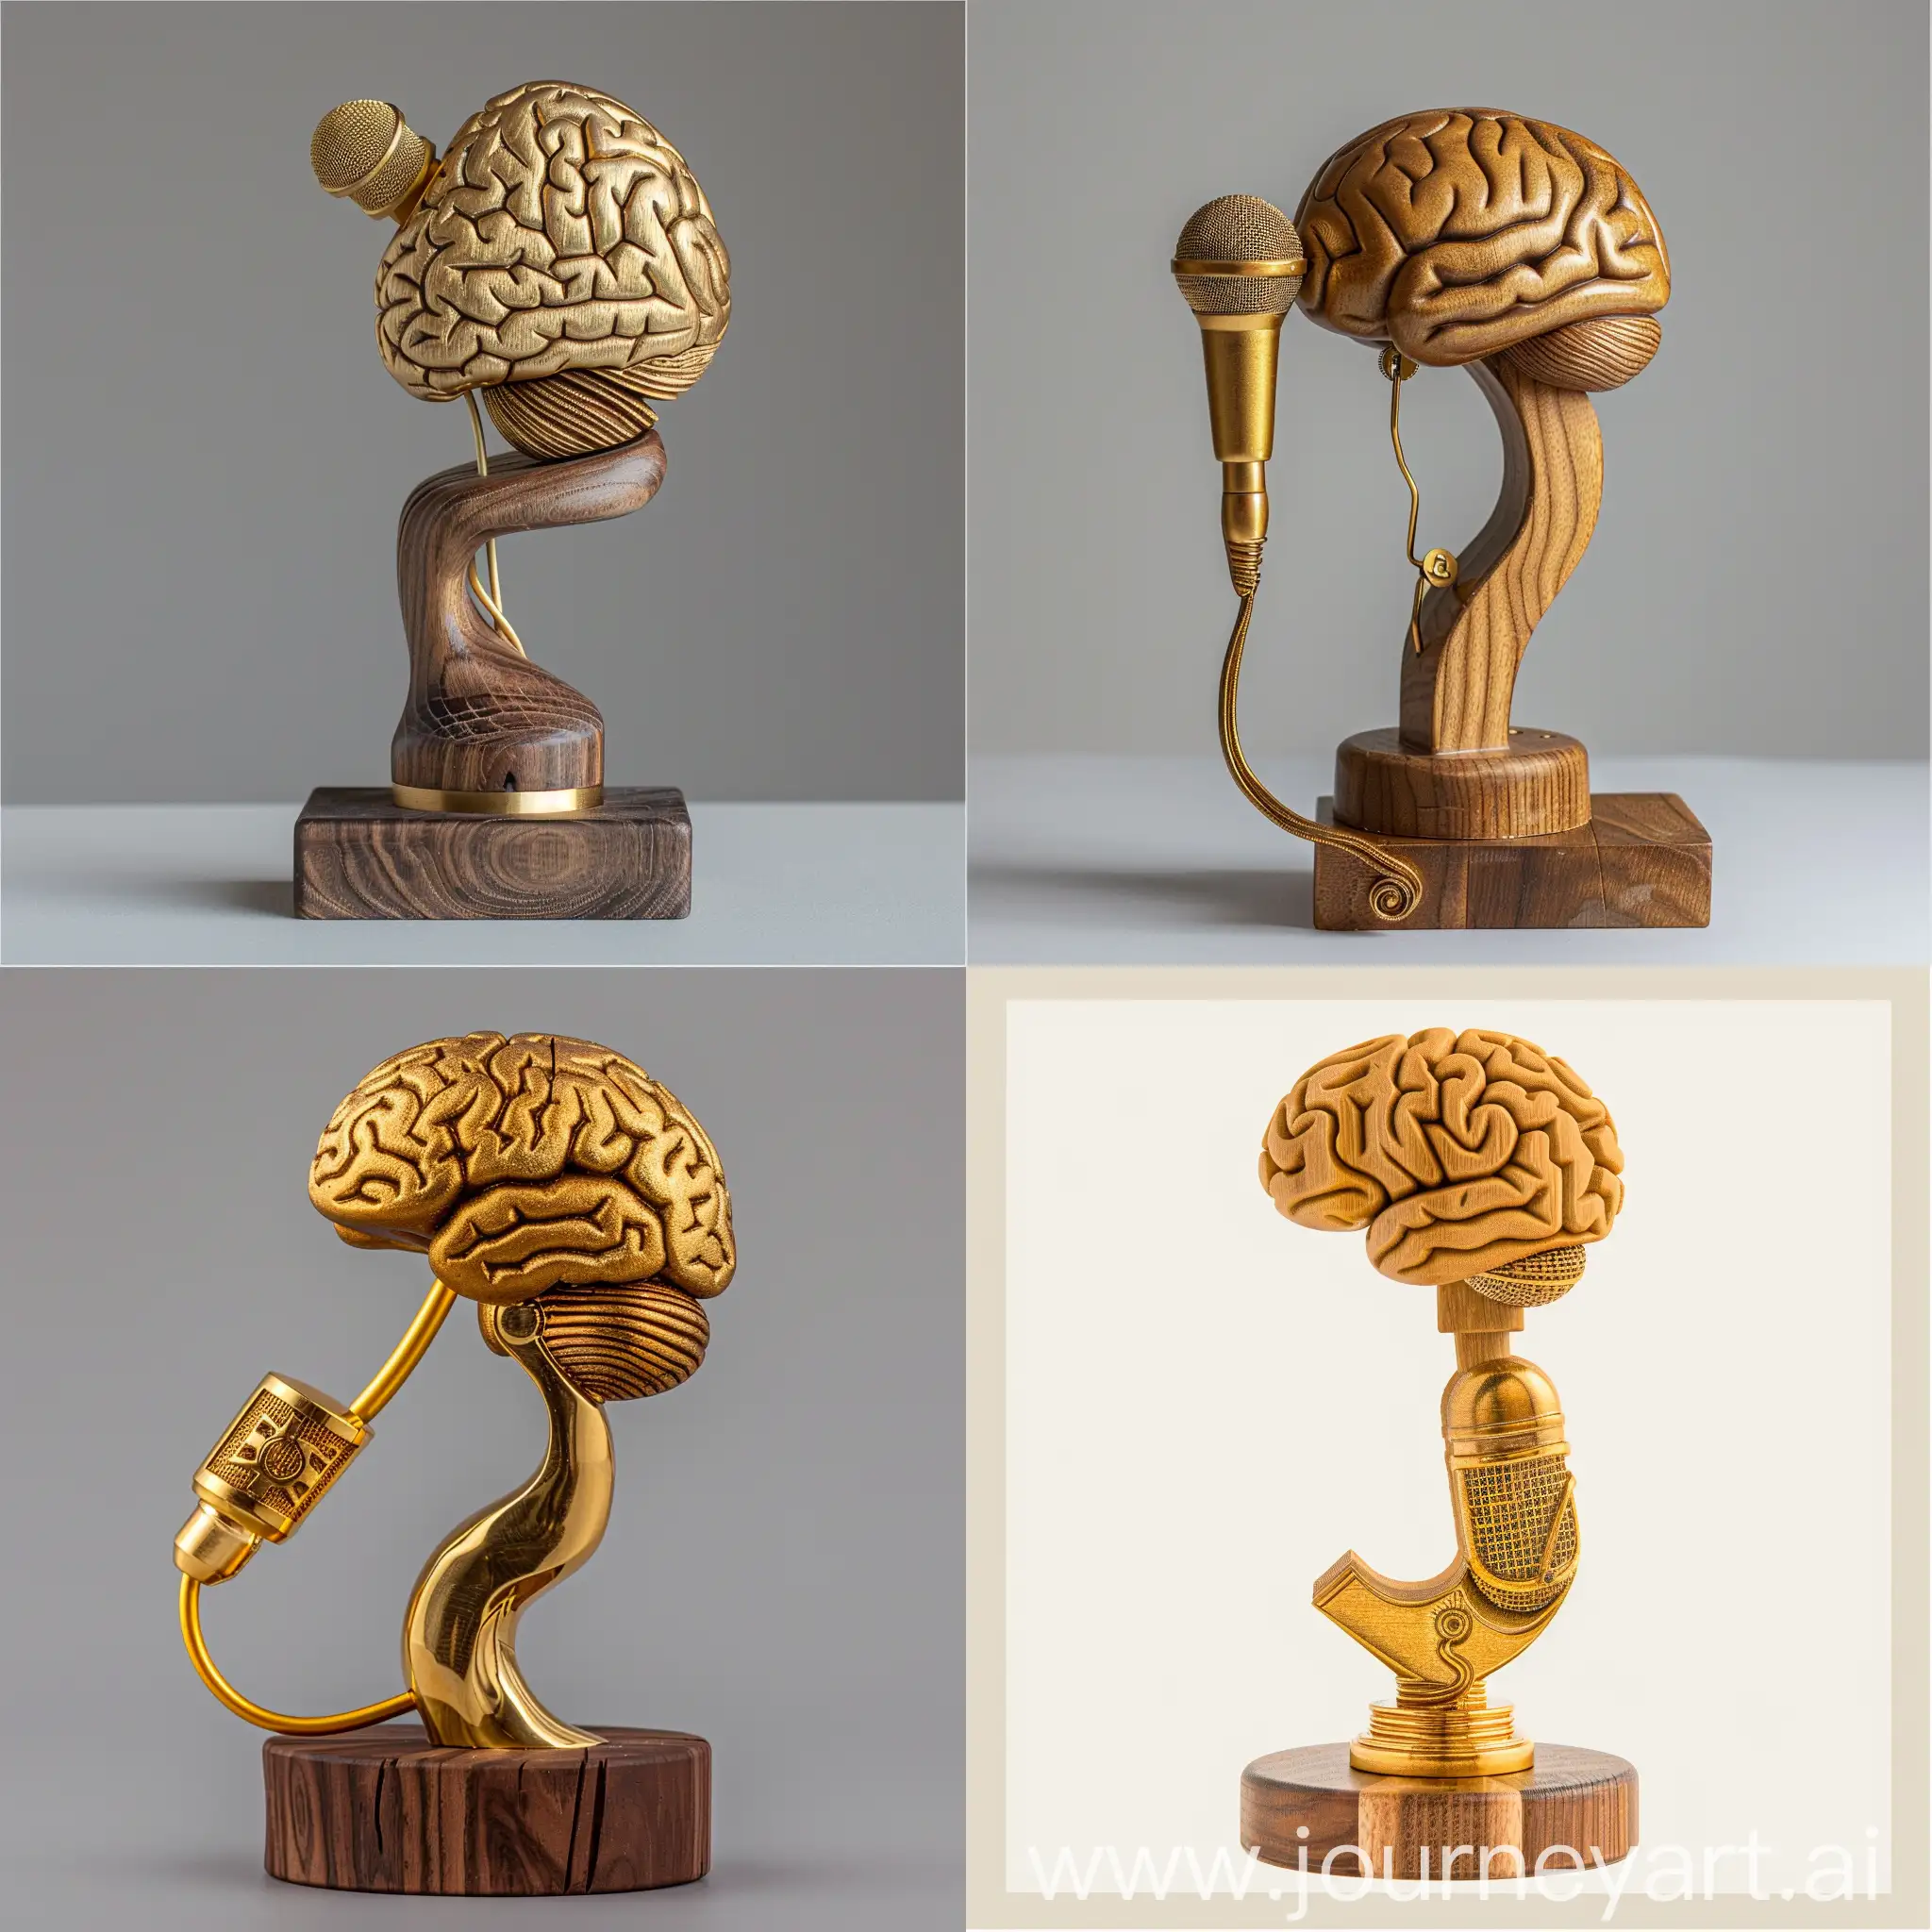 create a golden-wooden statue medal for winning prize of sience slam event, i want the golden microphone in it and integrated with a simple mandela of a brain curved on the statue and the end of the mandela line attached to the the microphone wire